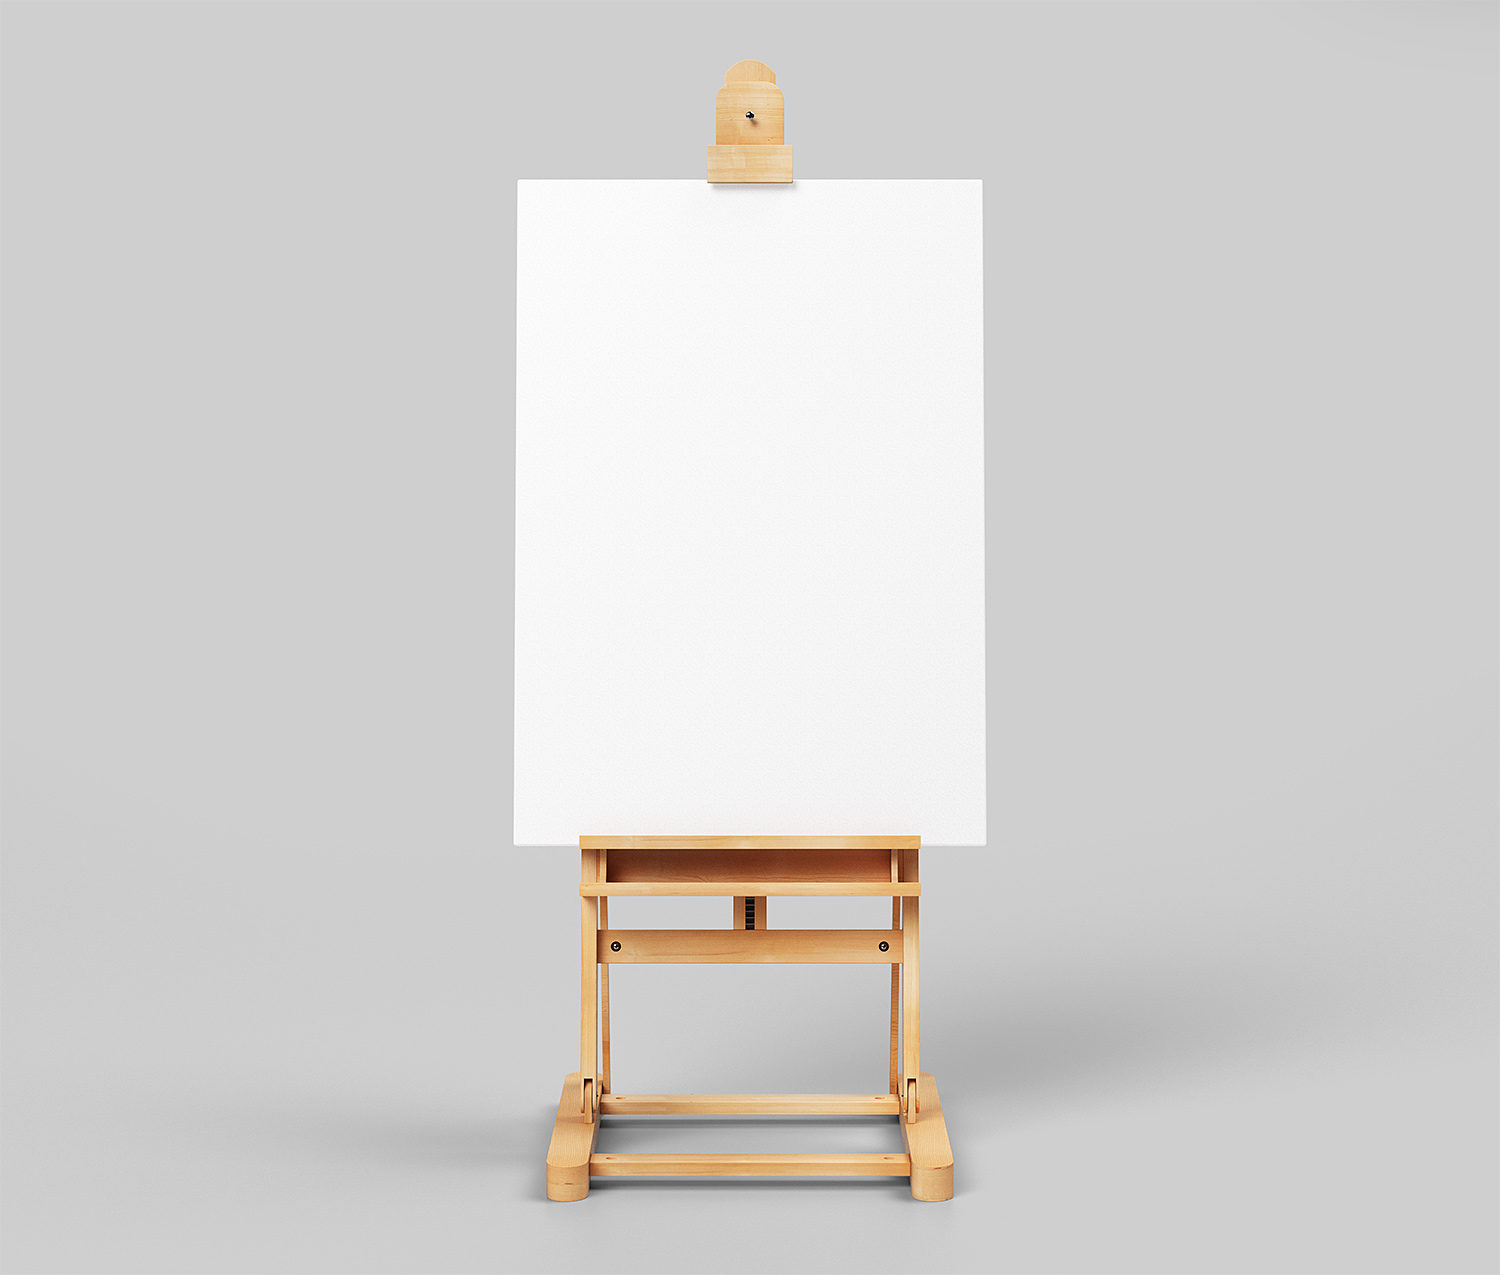 Canvas Poster on Easel Mockup Free